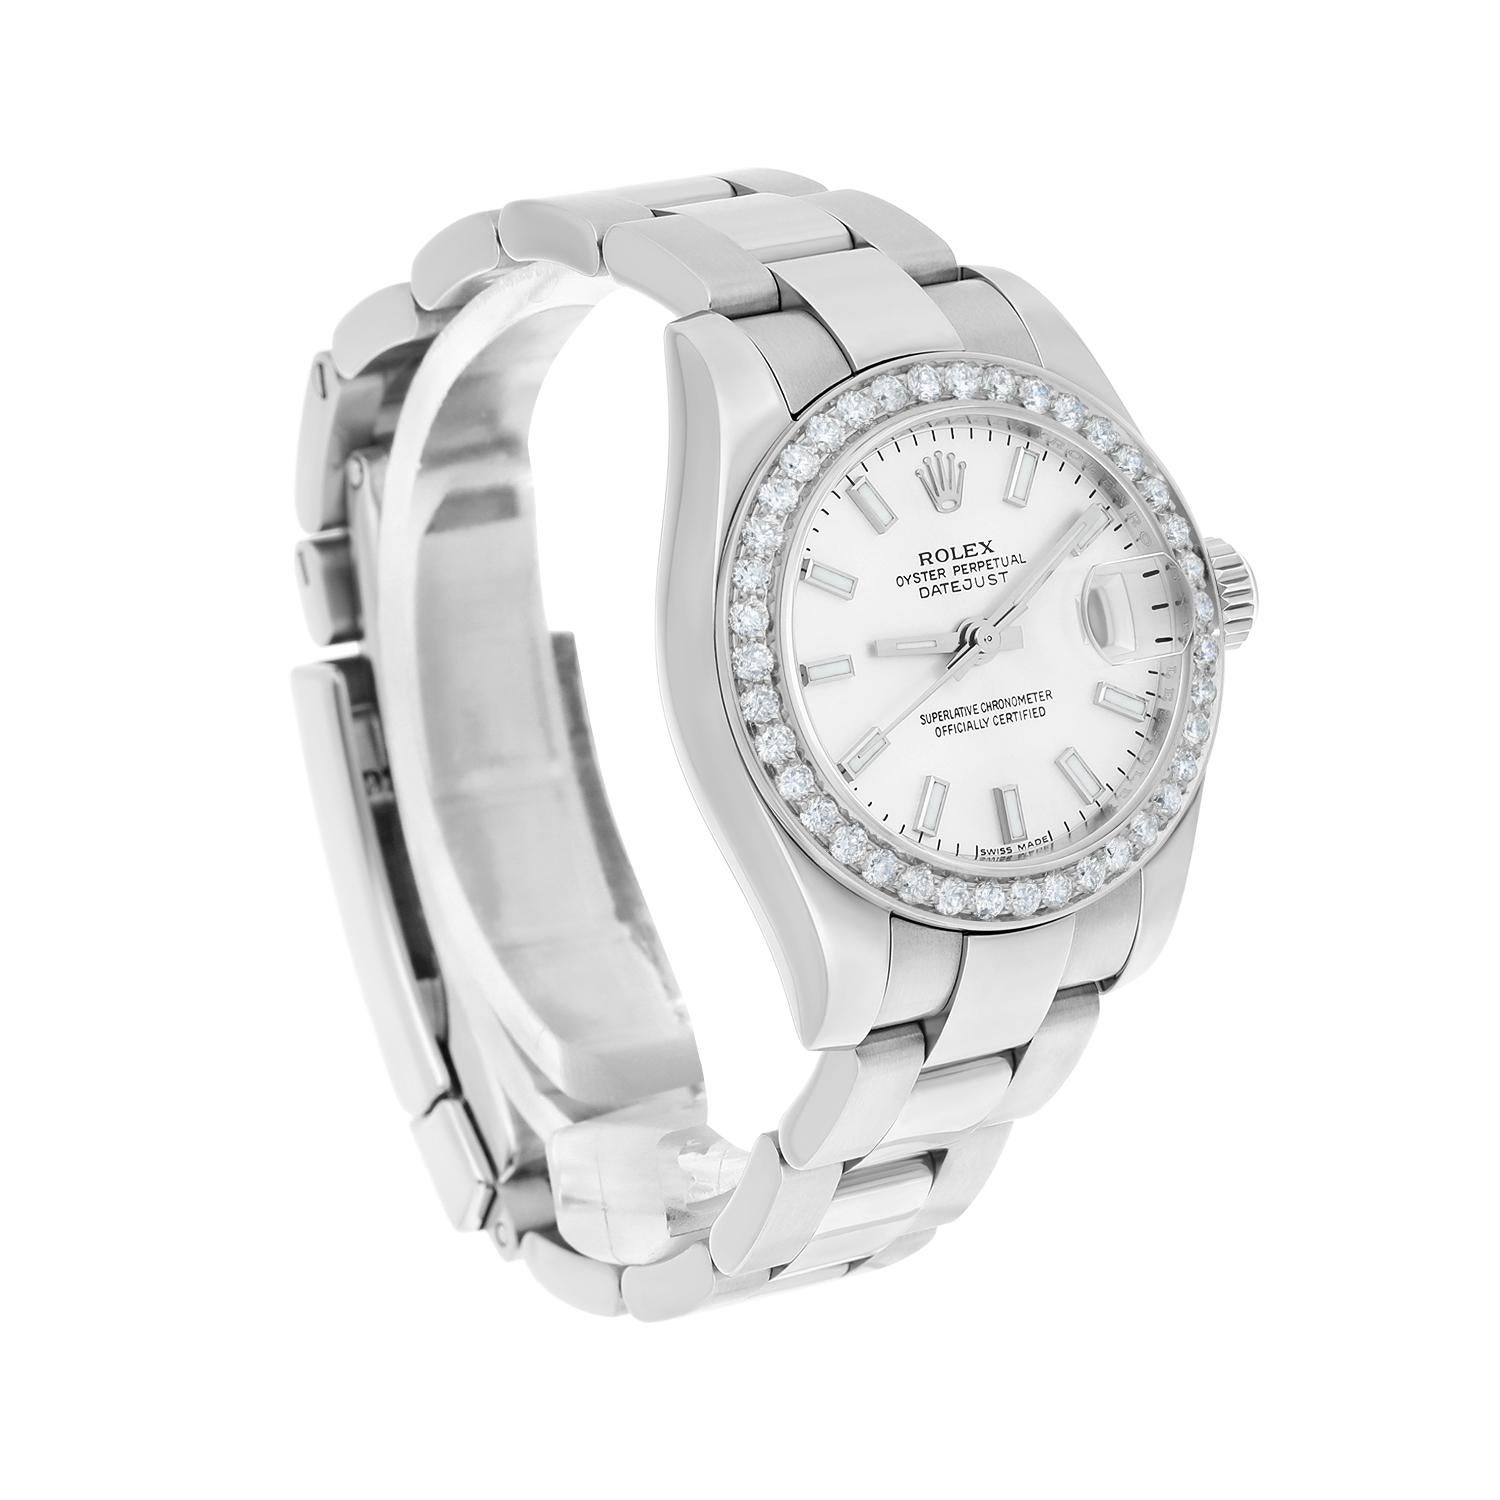 Rolex Datejust 26 Silver Index Dial Diamond Bezel Oyster Band Steel Watch 179160 For Sale 1